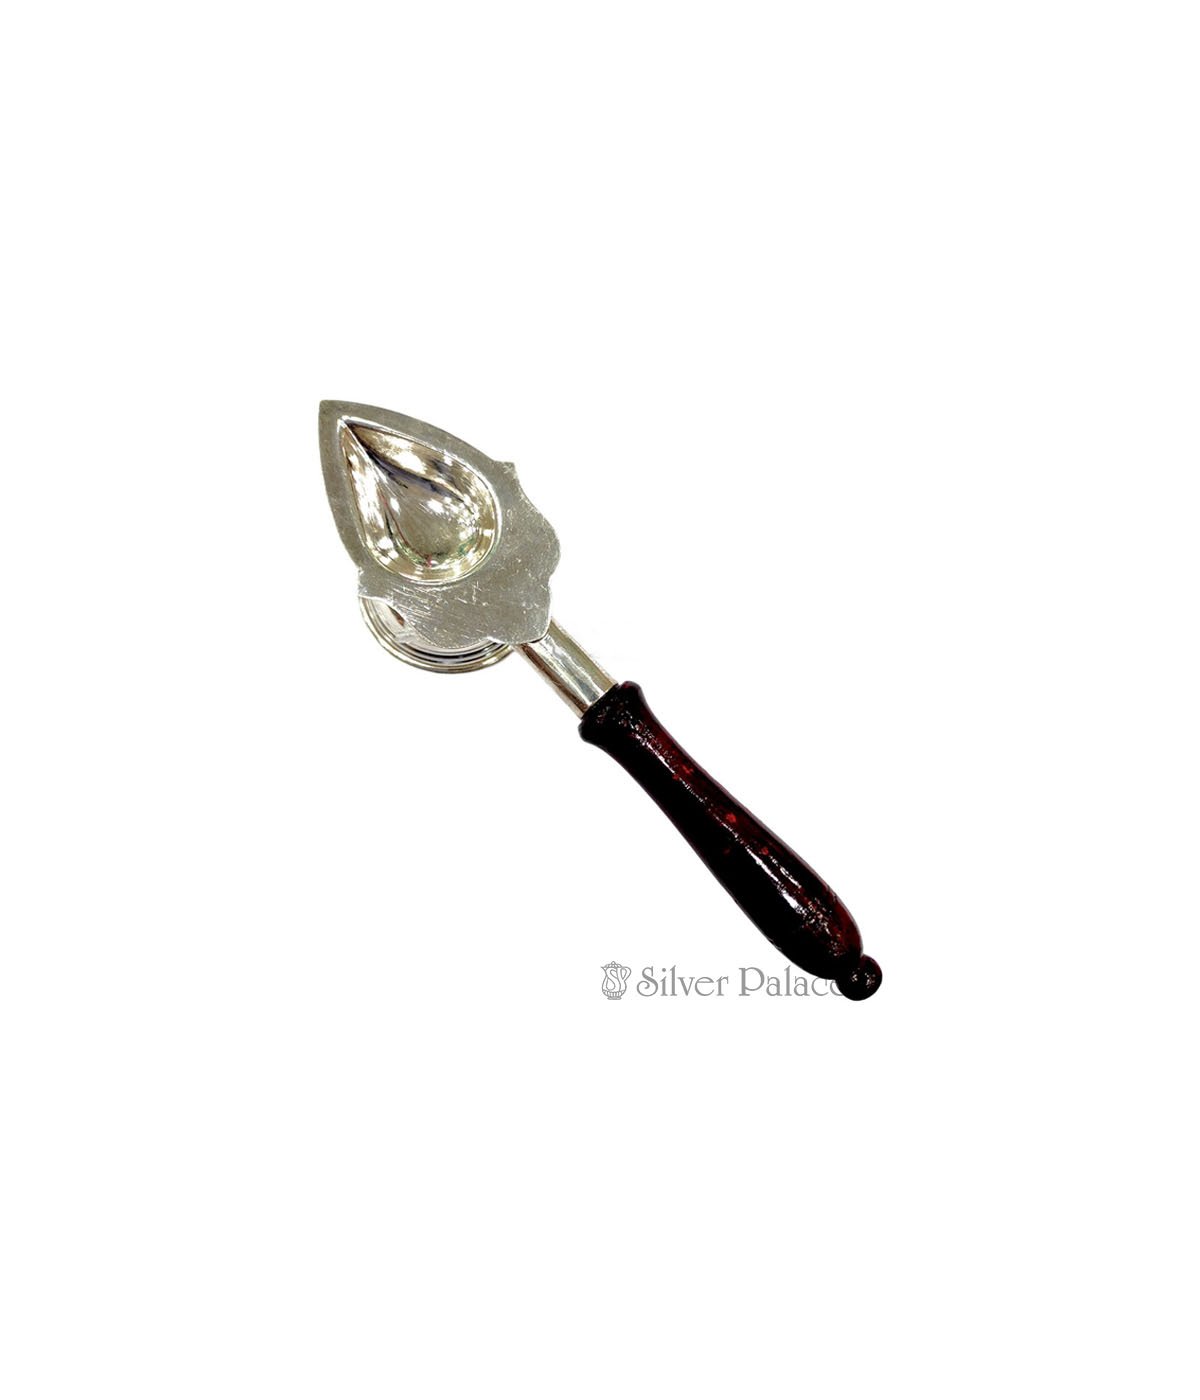 PURE SILVER SINGLE ARTHI WITH WOODEN HANDLE